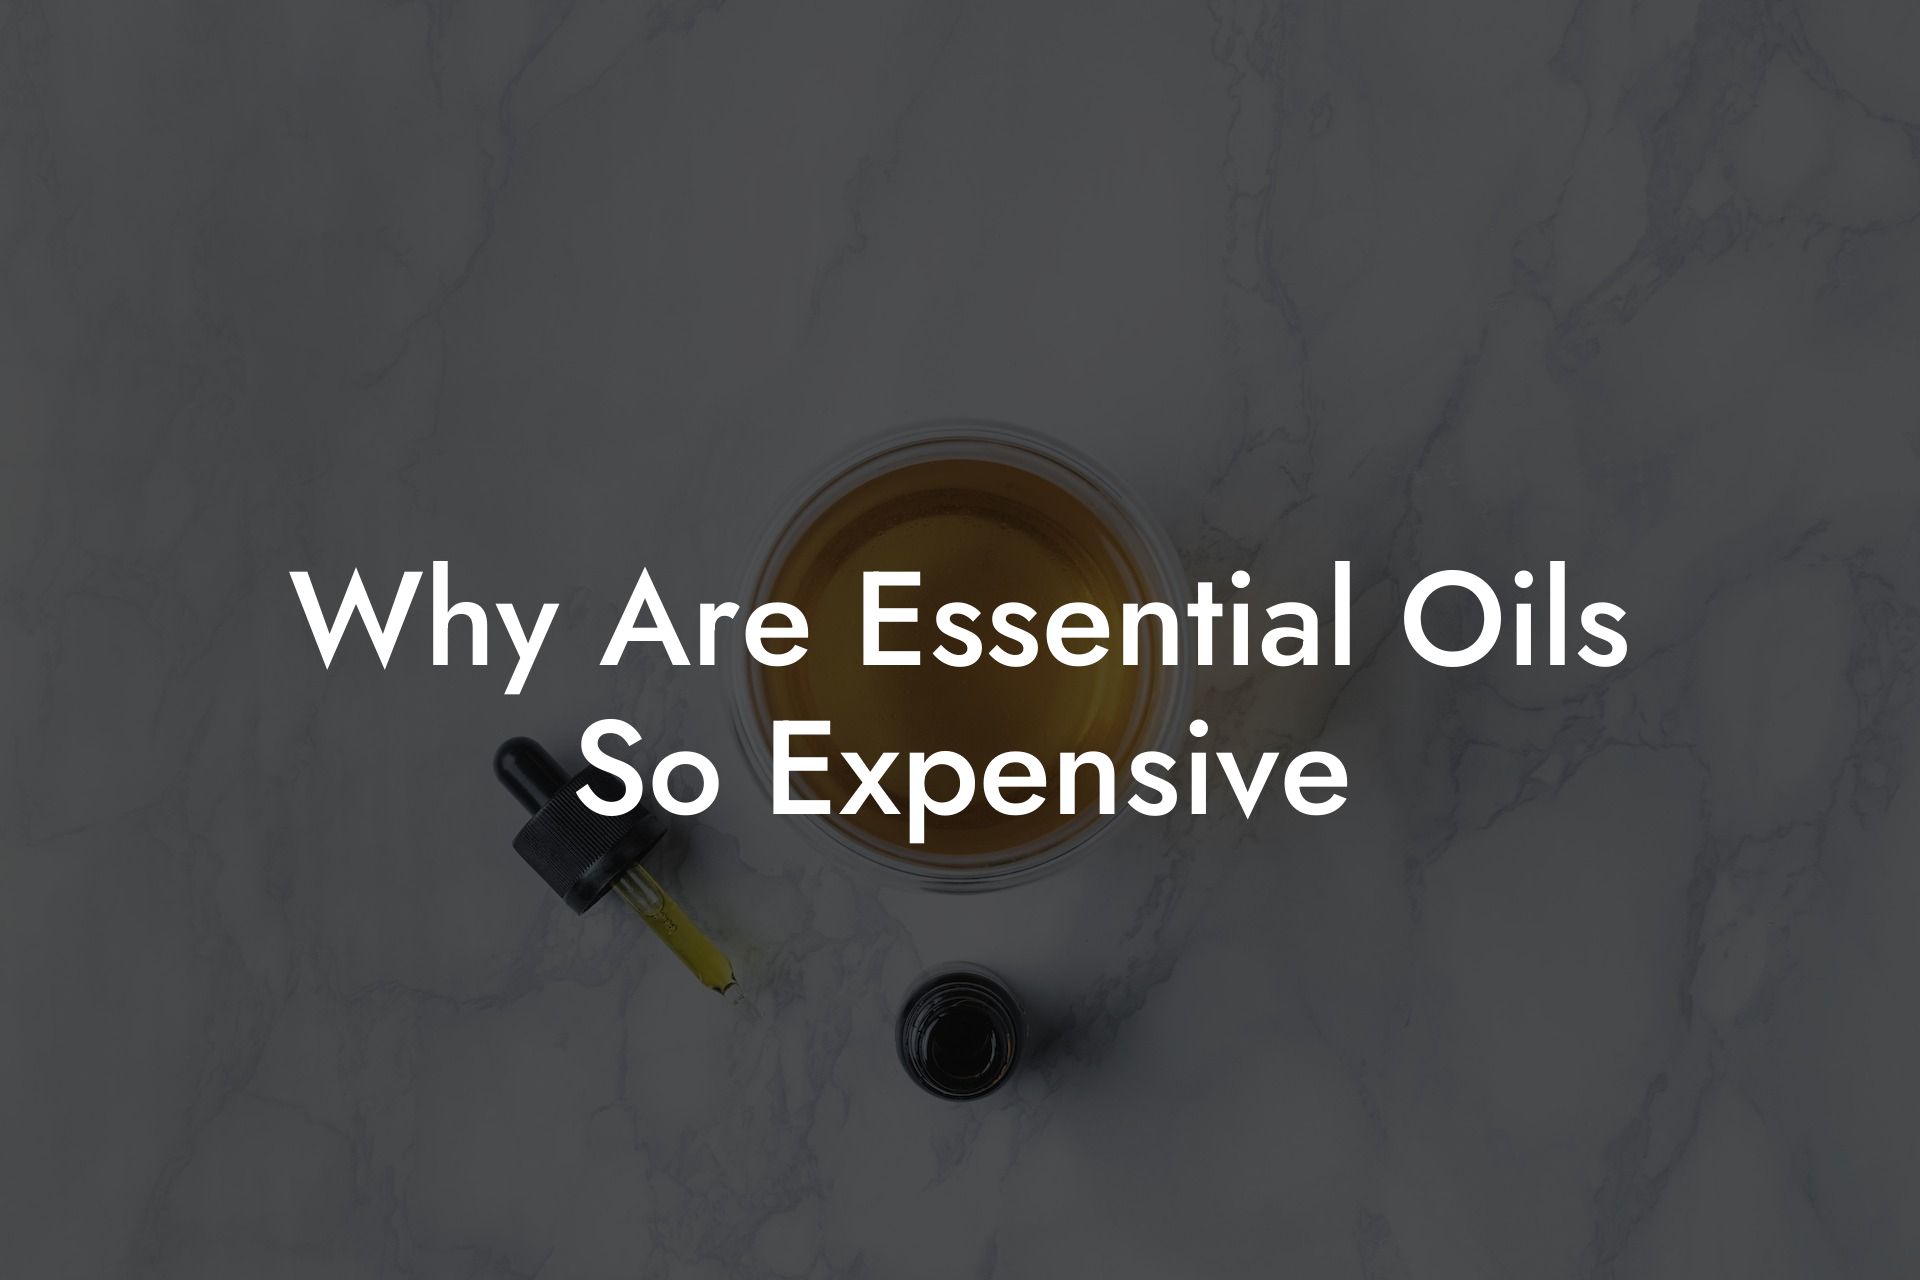 Why Are Essential Oils So Expensive